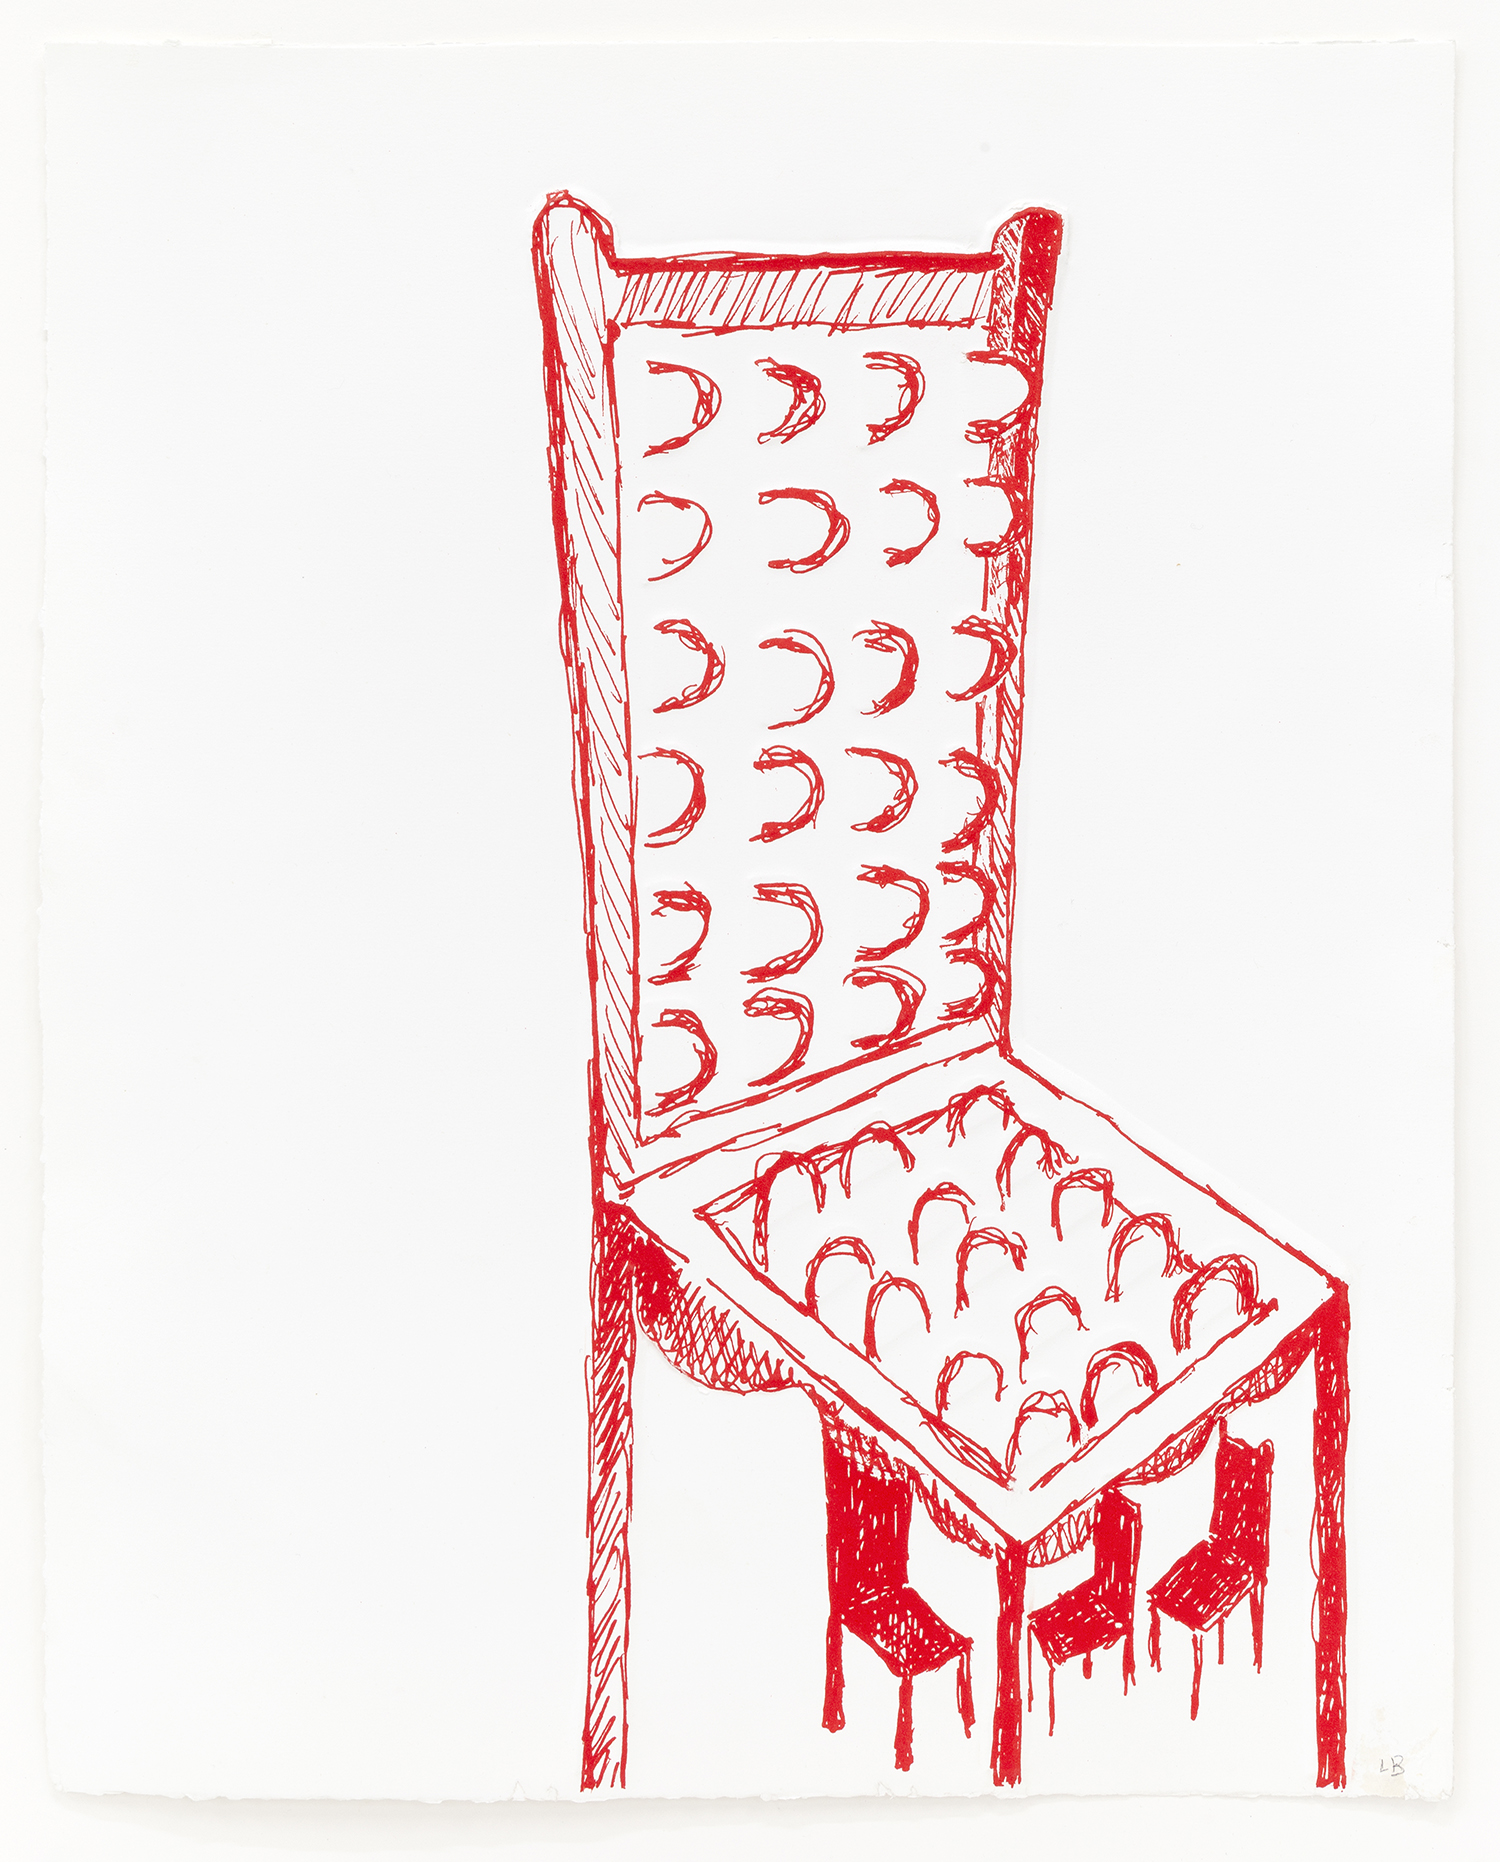 Le Père et les 3 Fils (Version I, State II), 1999, Lithograph and embossing in colors, 20 3/4 x 17 inches (52.7 x 43.2 cm)